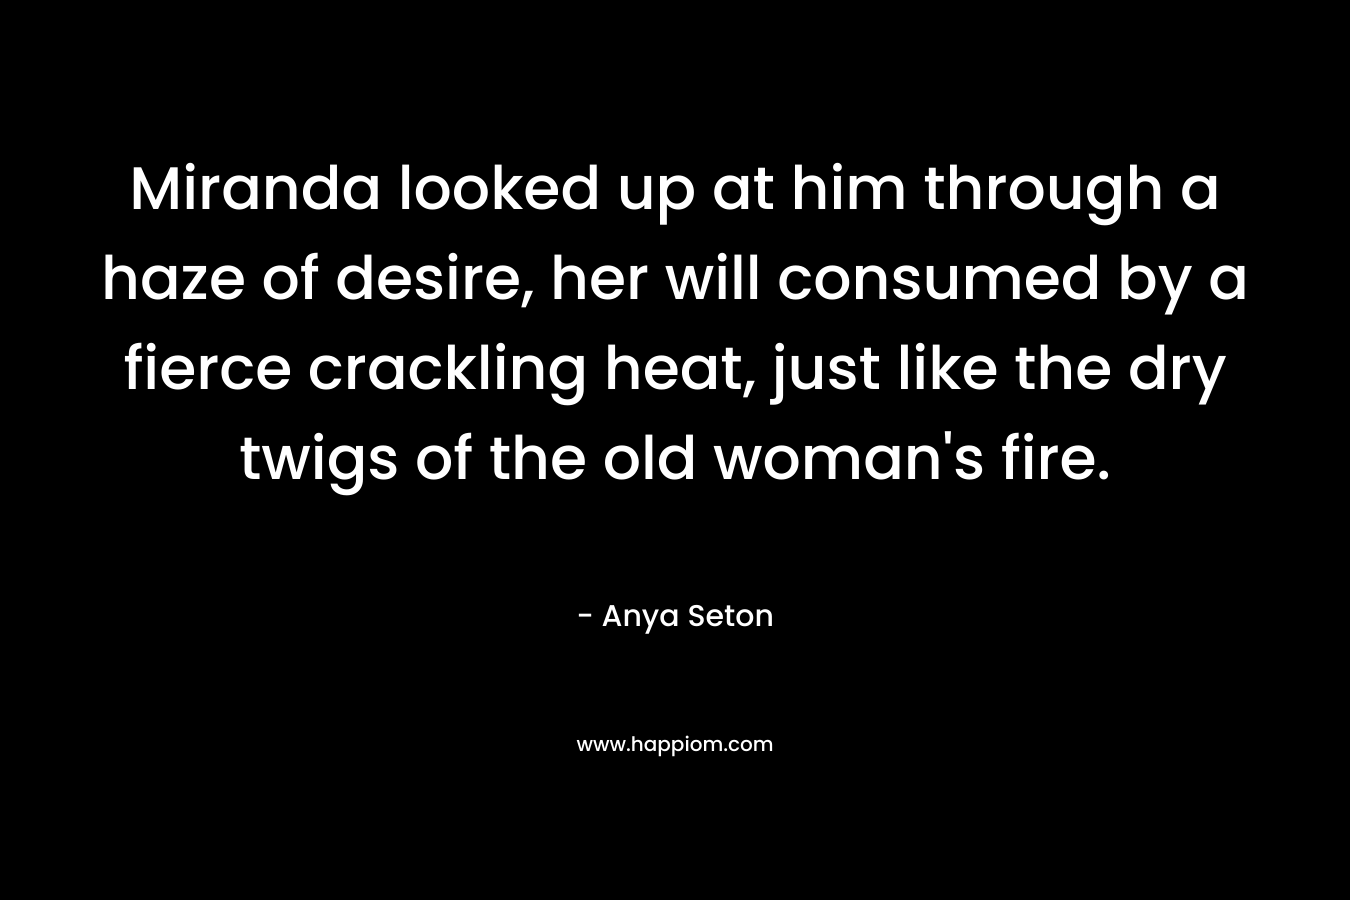 Miranda looked up at him through a haze of desire, her will consumed by a fierce crackling heat, just like the dry twigs of the old woman's fire.